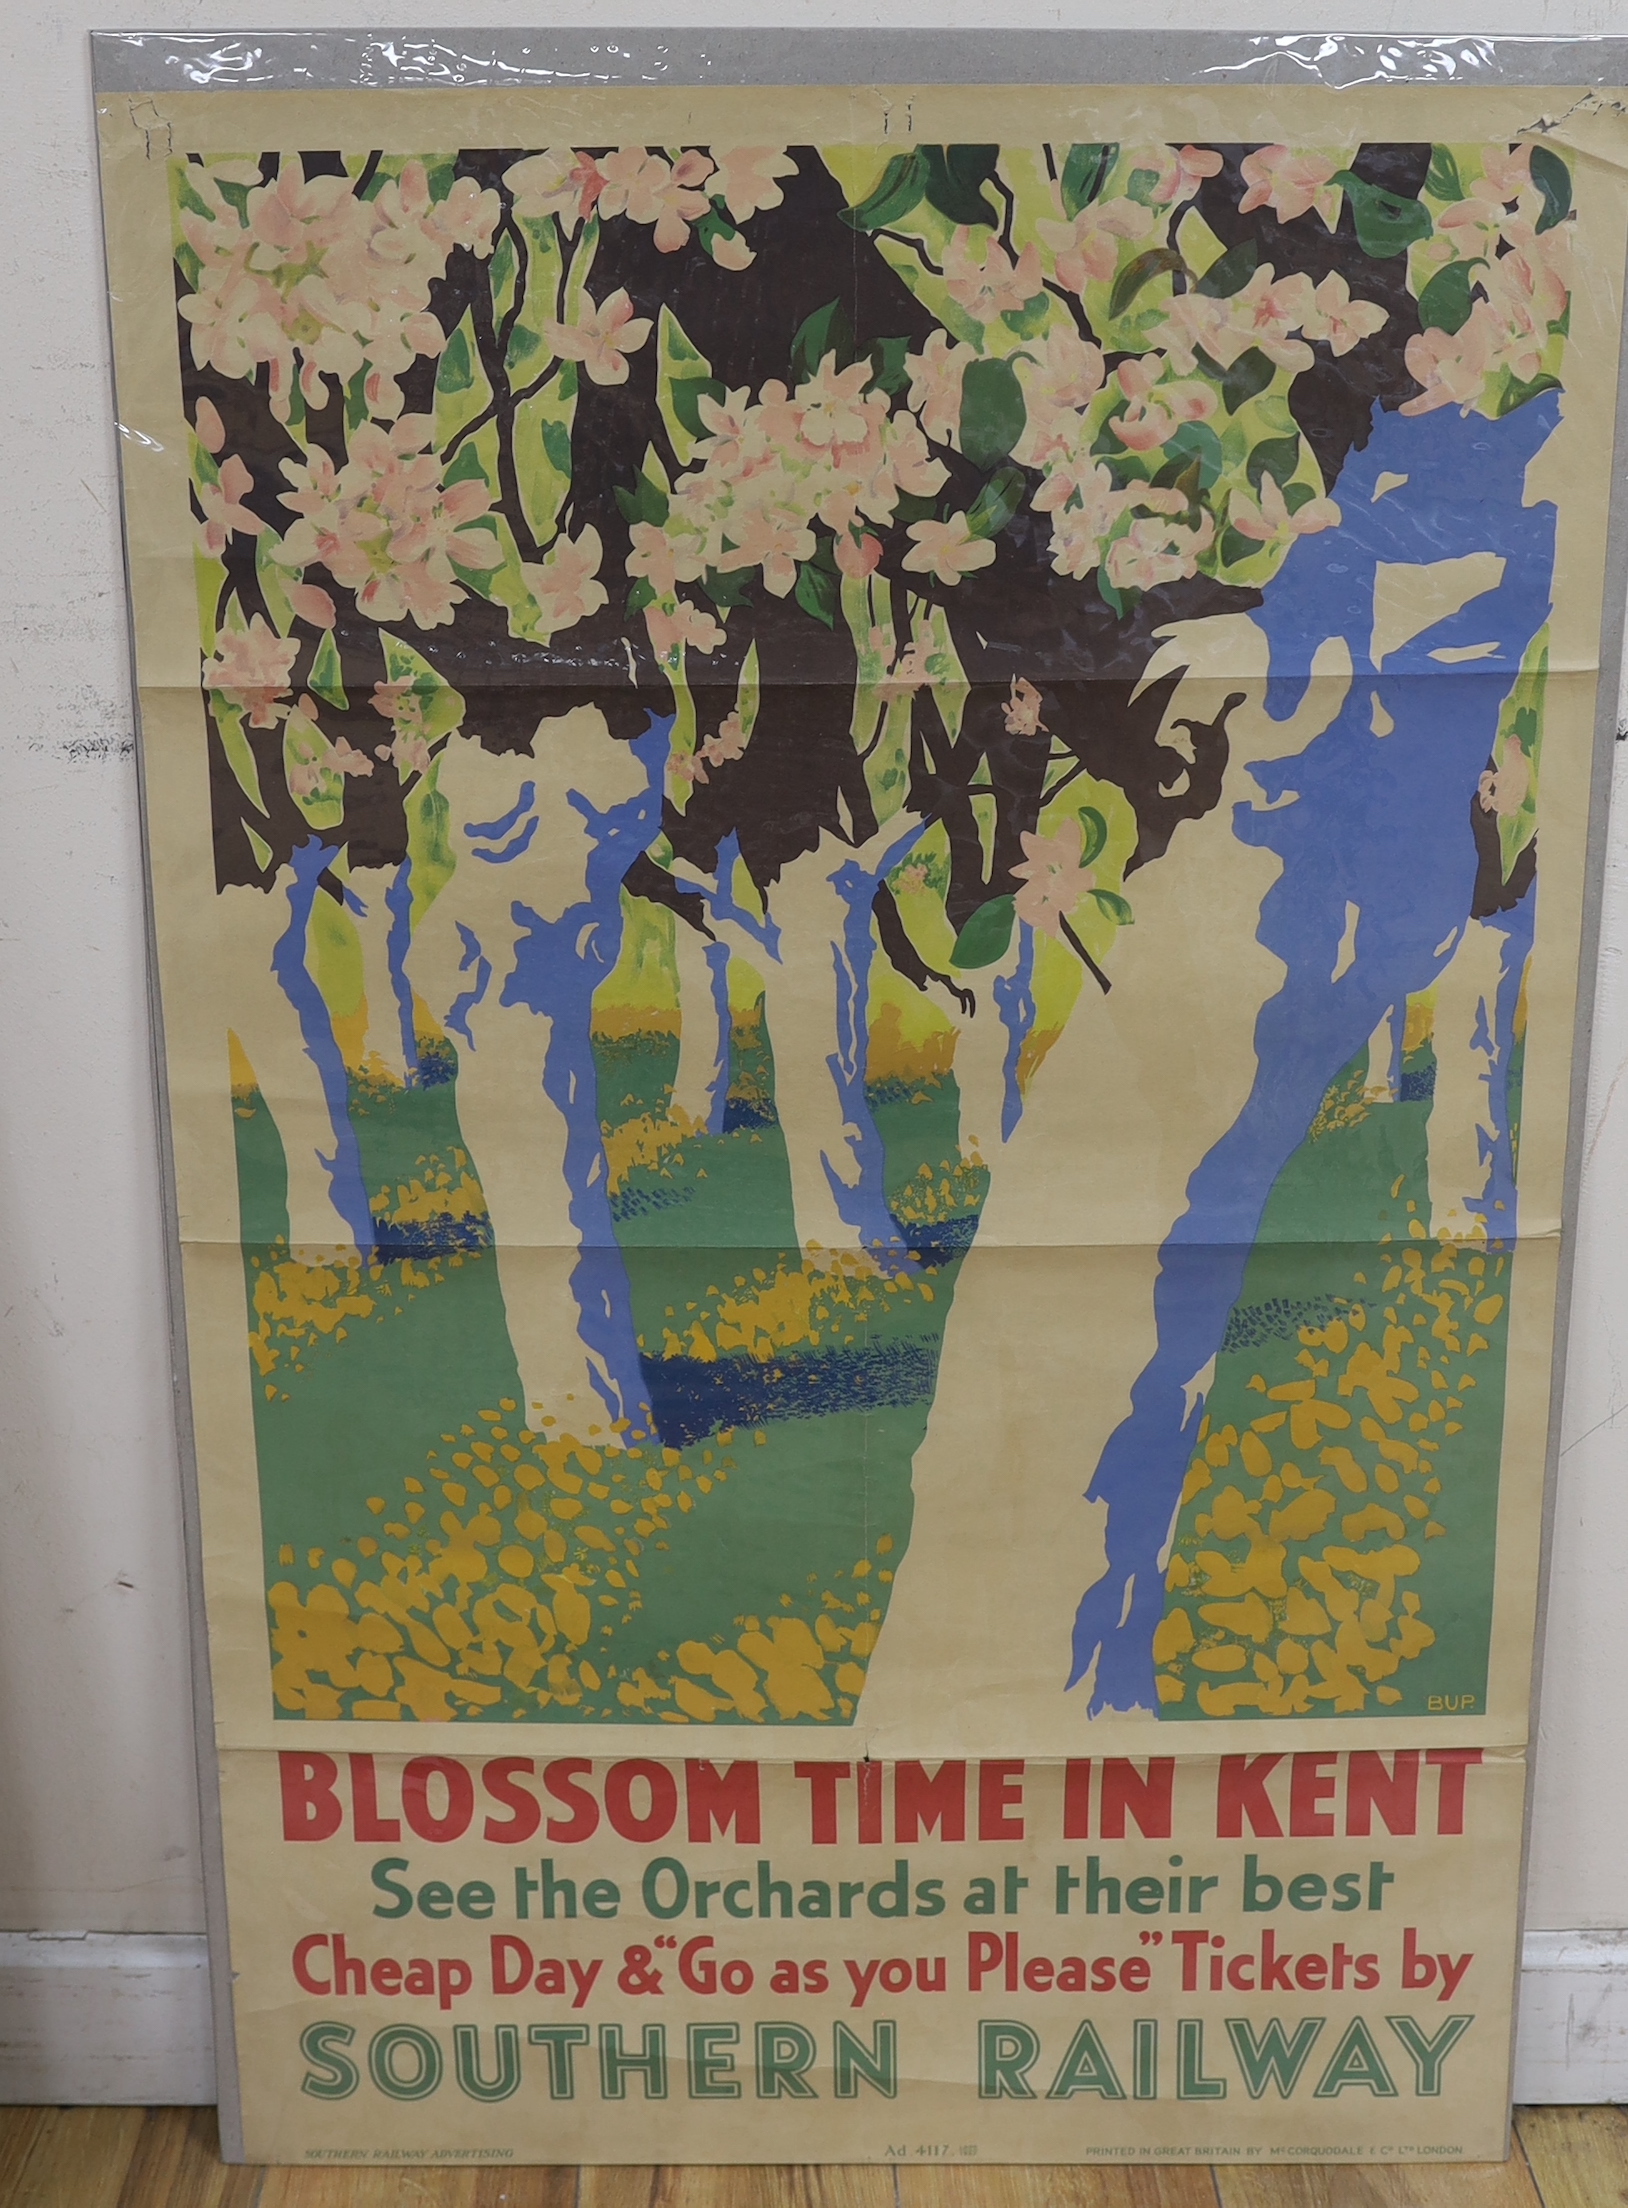 BUP, lithographic poster for Southern Railways, 'Blossom Time in Kent', printed by McCorquodale & - Image 2 of 2